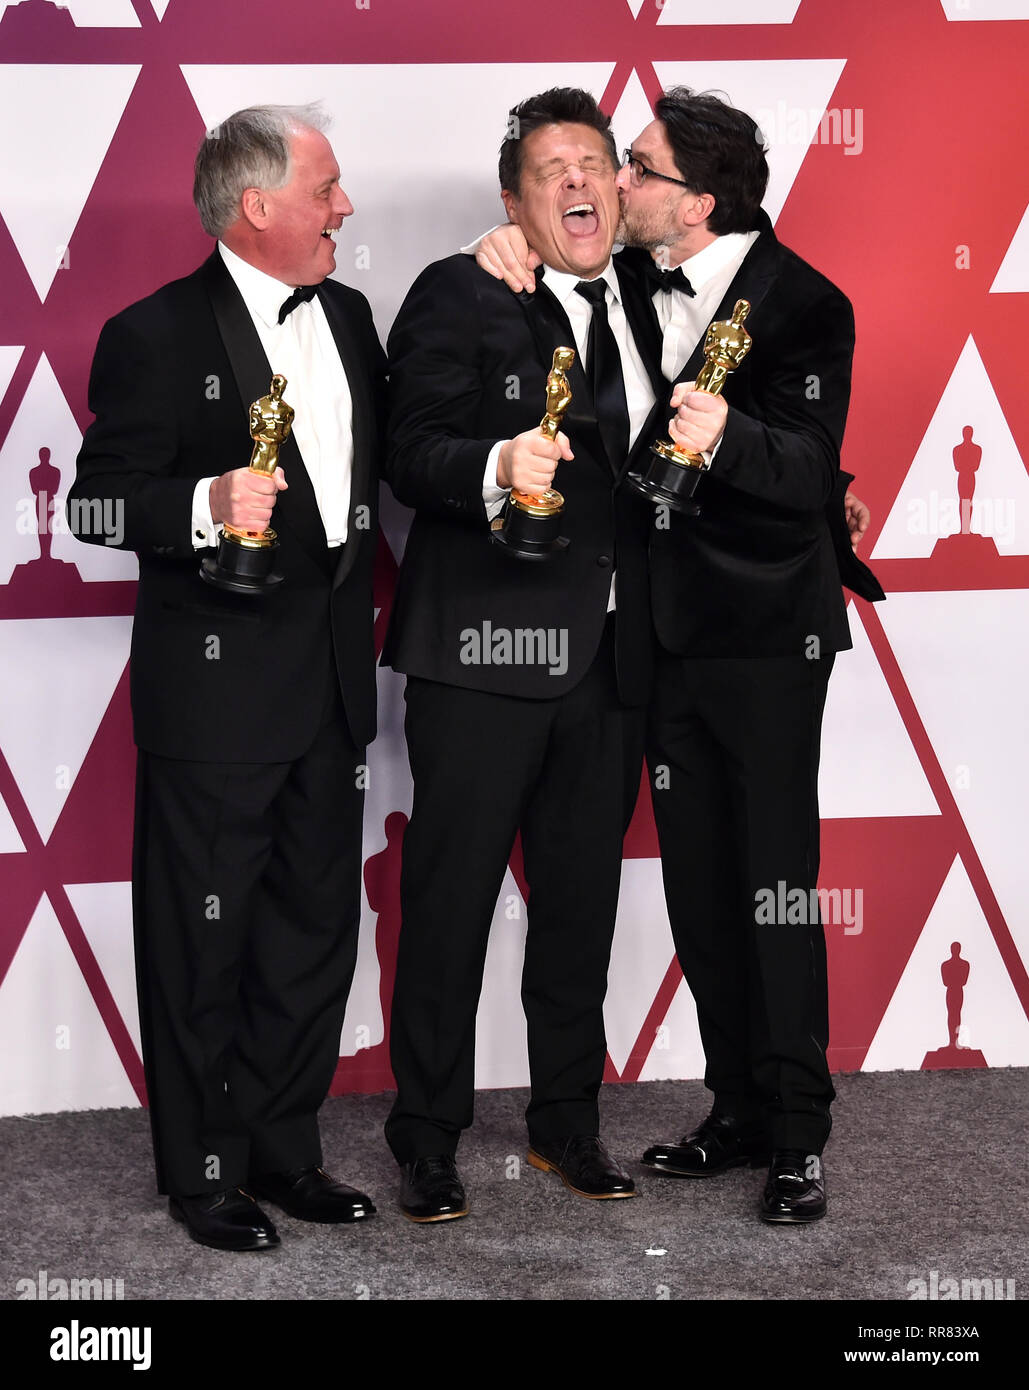 Paul Massey, Tim Cavagin and John Casali with the award for best Sound Mixing for Bohemian Rhapsody in the press room at the 91st Academy Awards held at the Dolby Theatre in Hollywood, Los Angeles, USA. Stock Photo